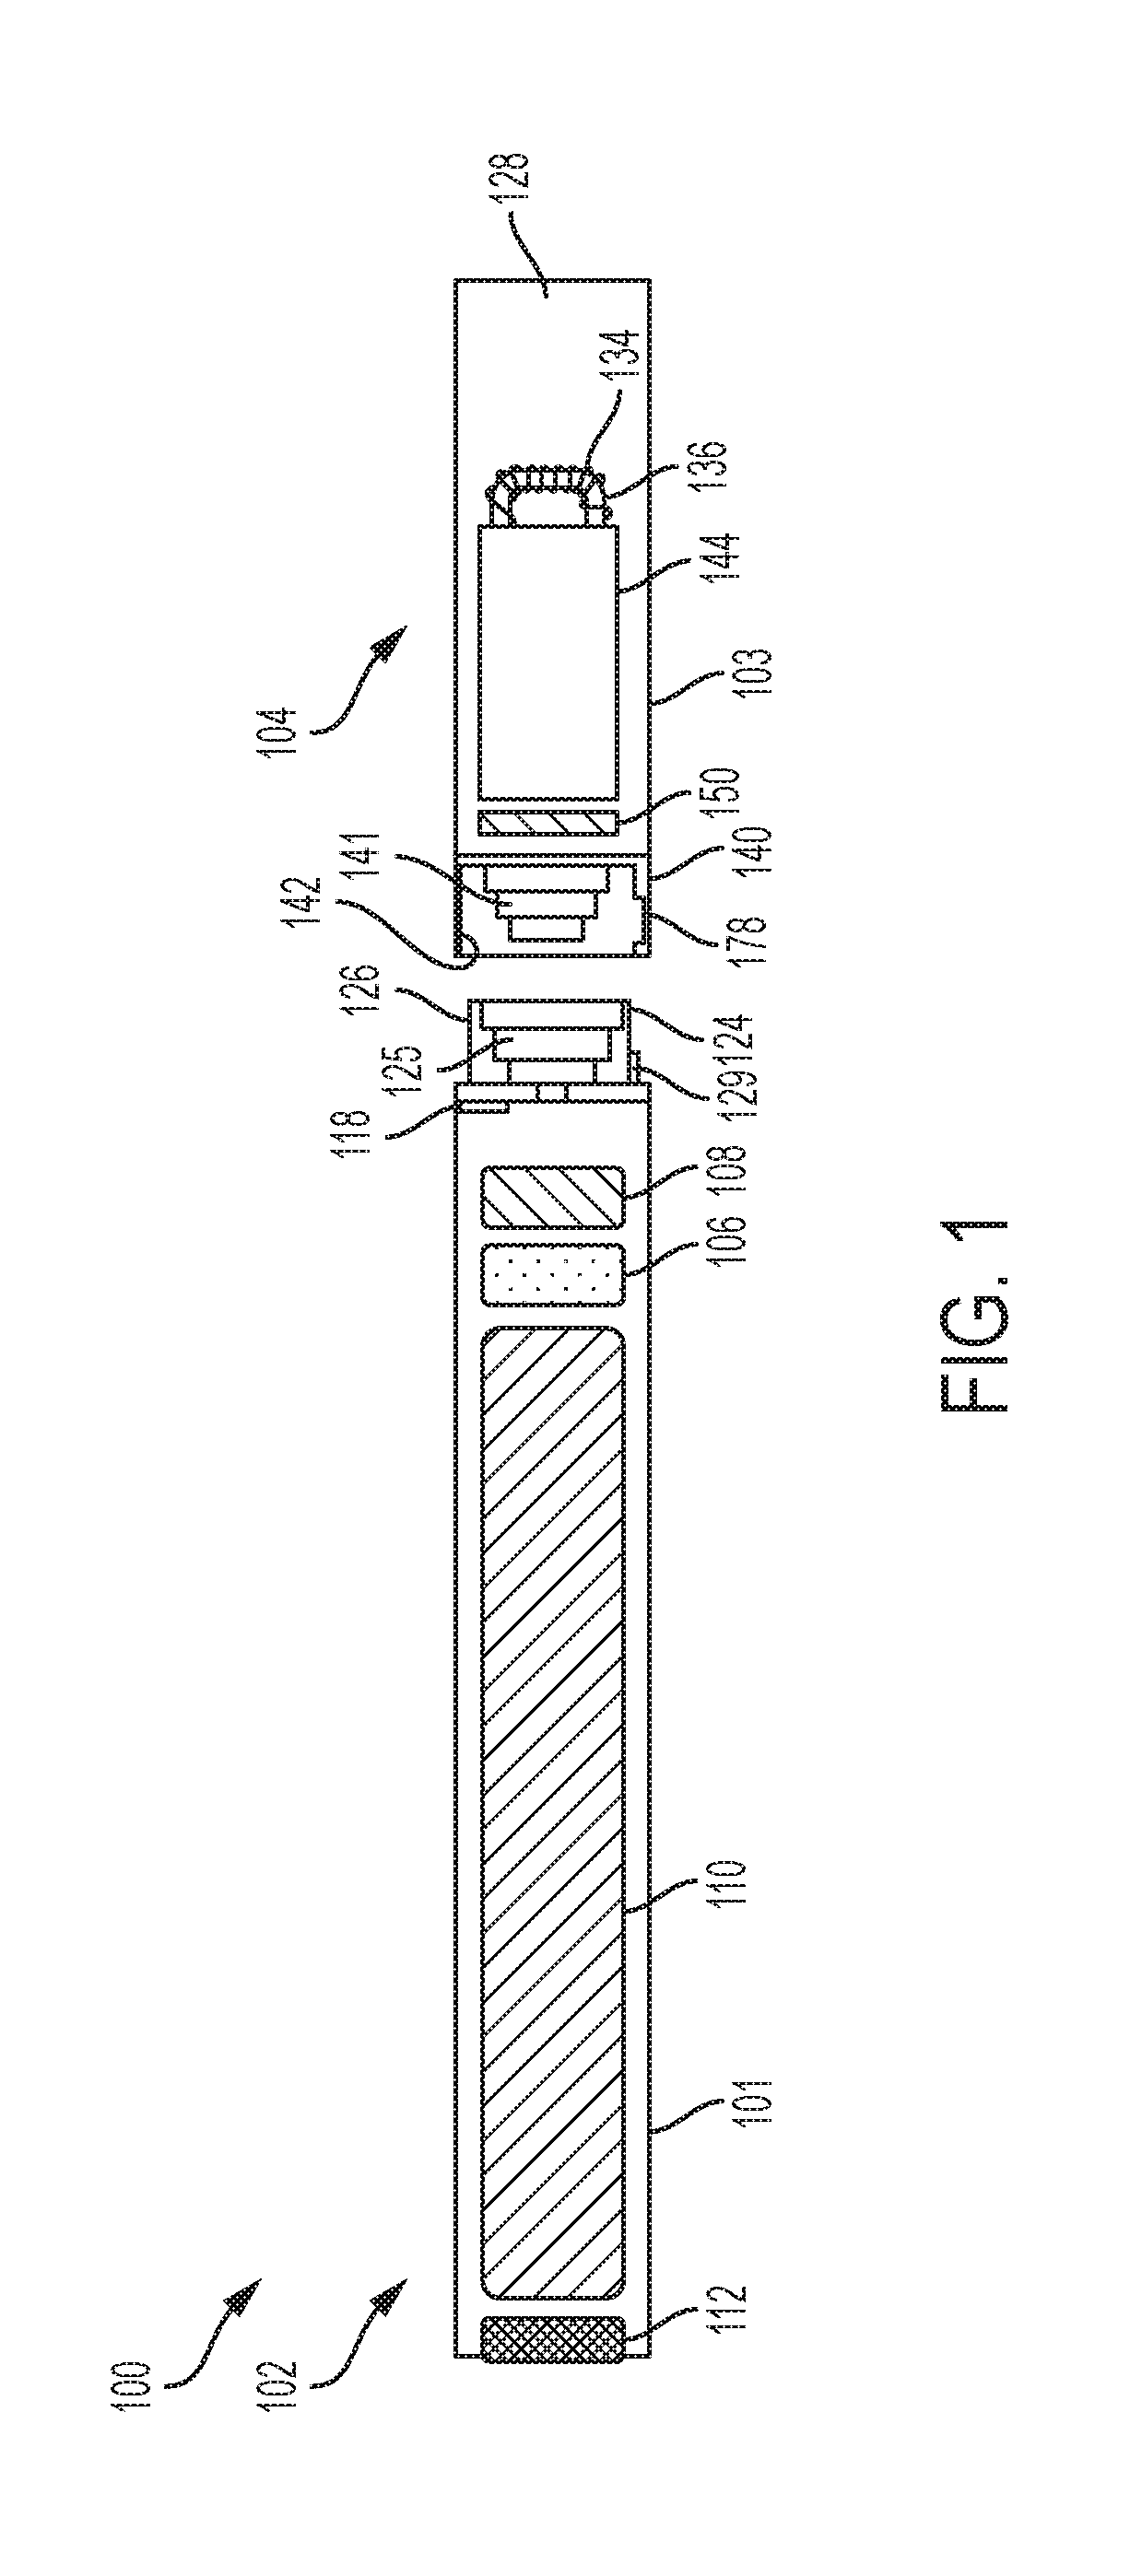 Aerosol delivery device including a ceramic wicking element